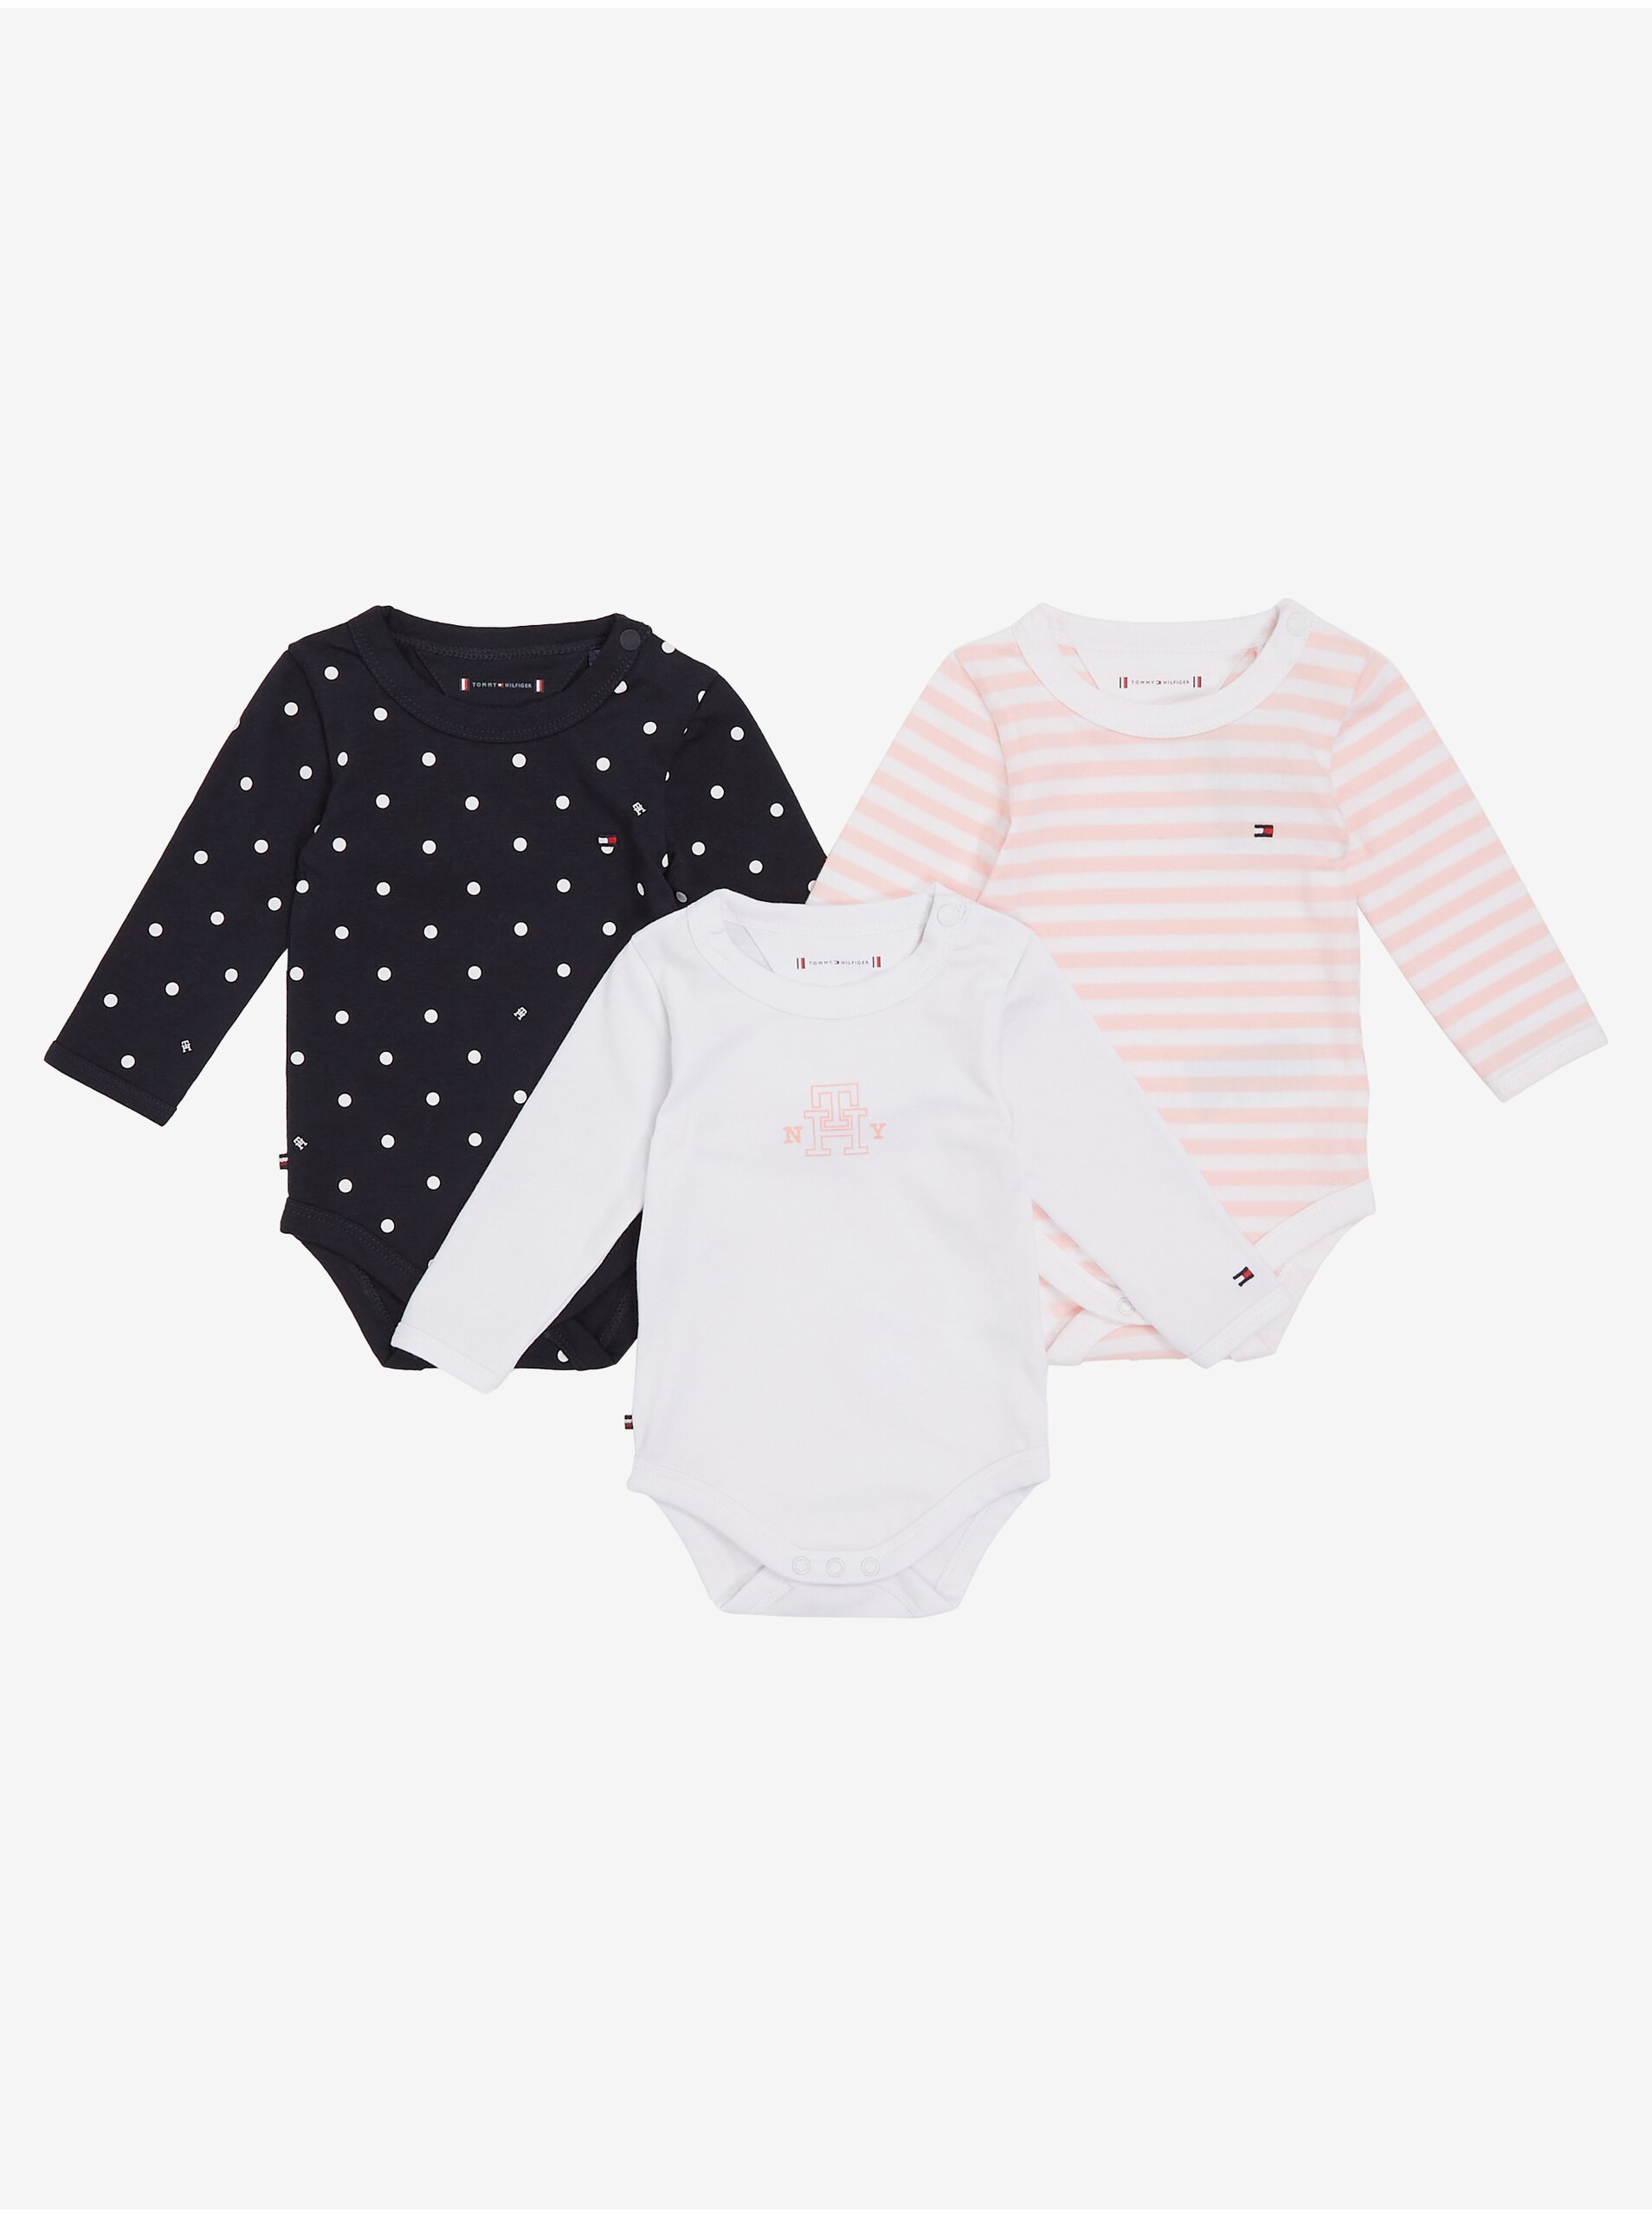 Set of three children's points in white, black and pink Tommy Hilfiger - Girls